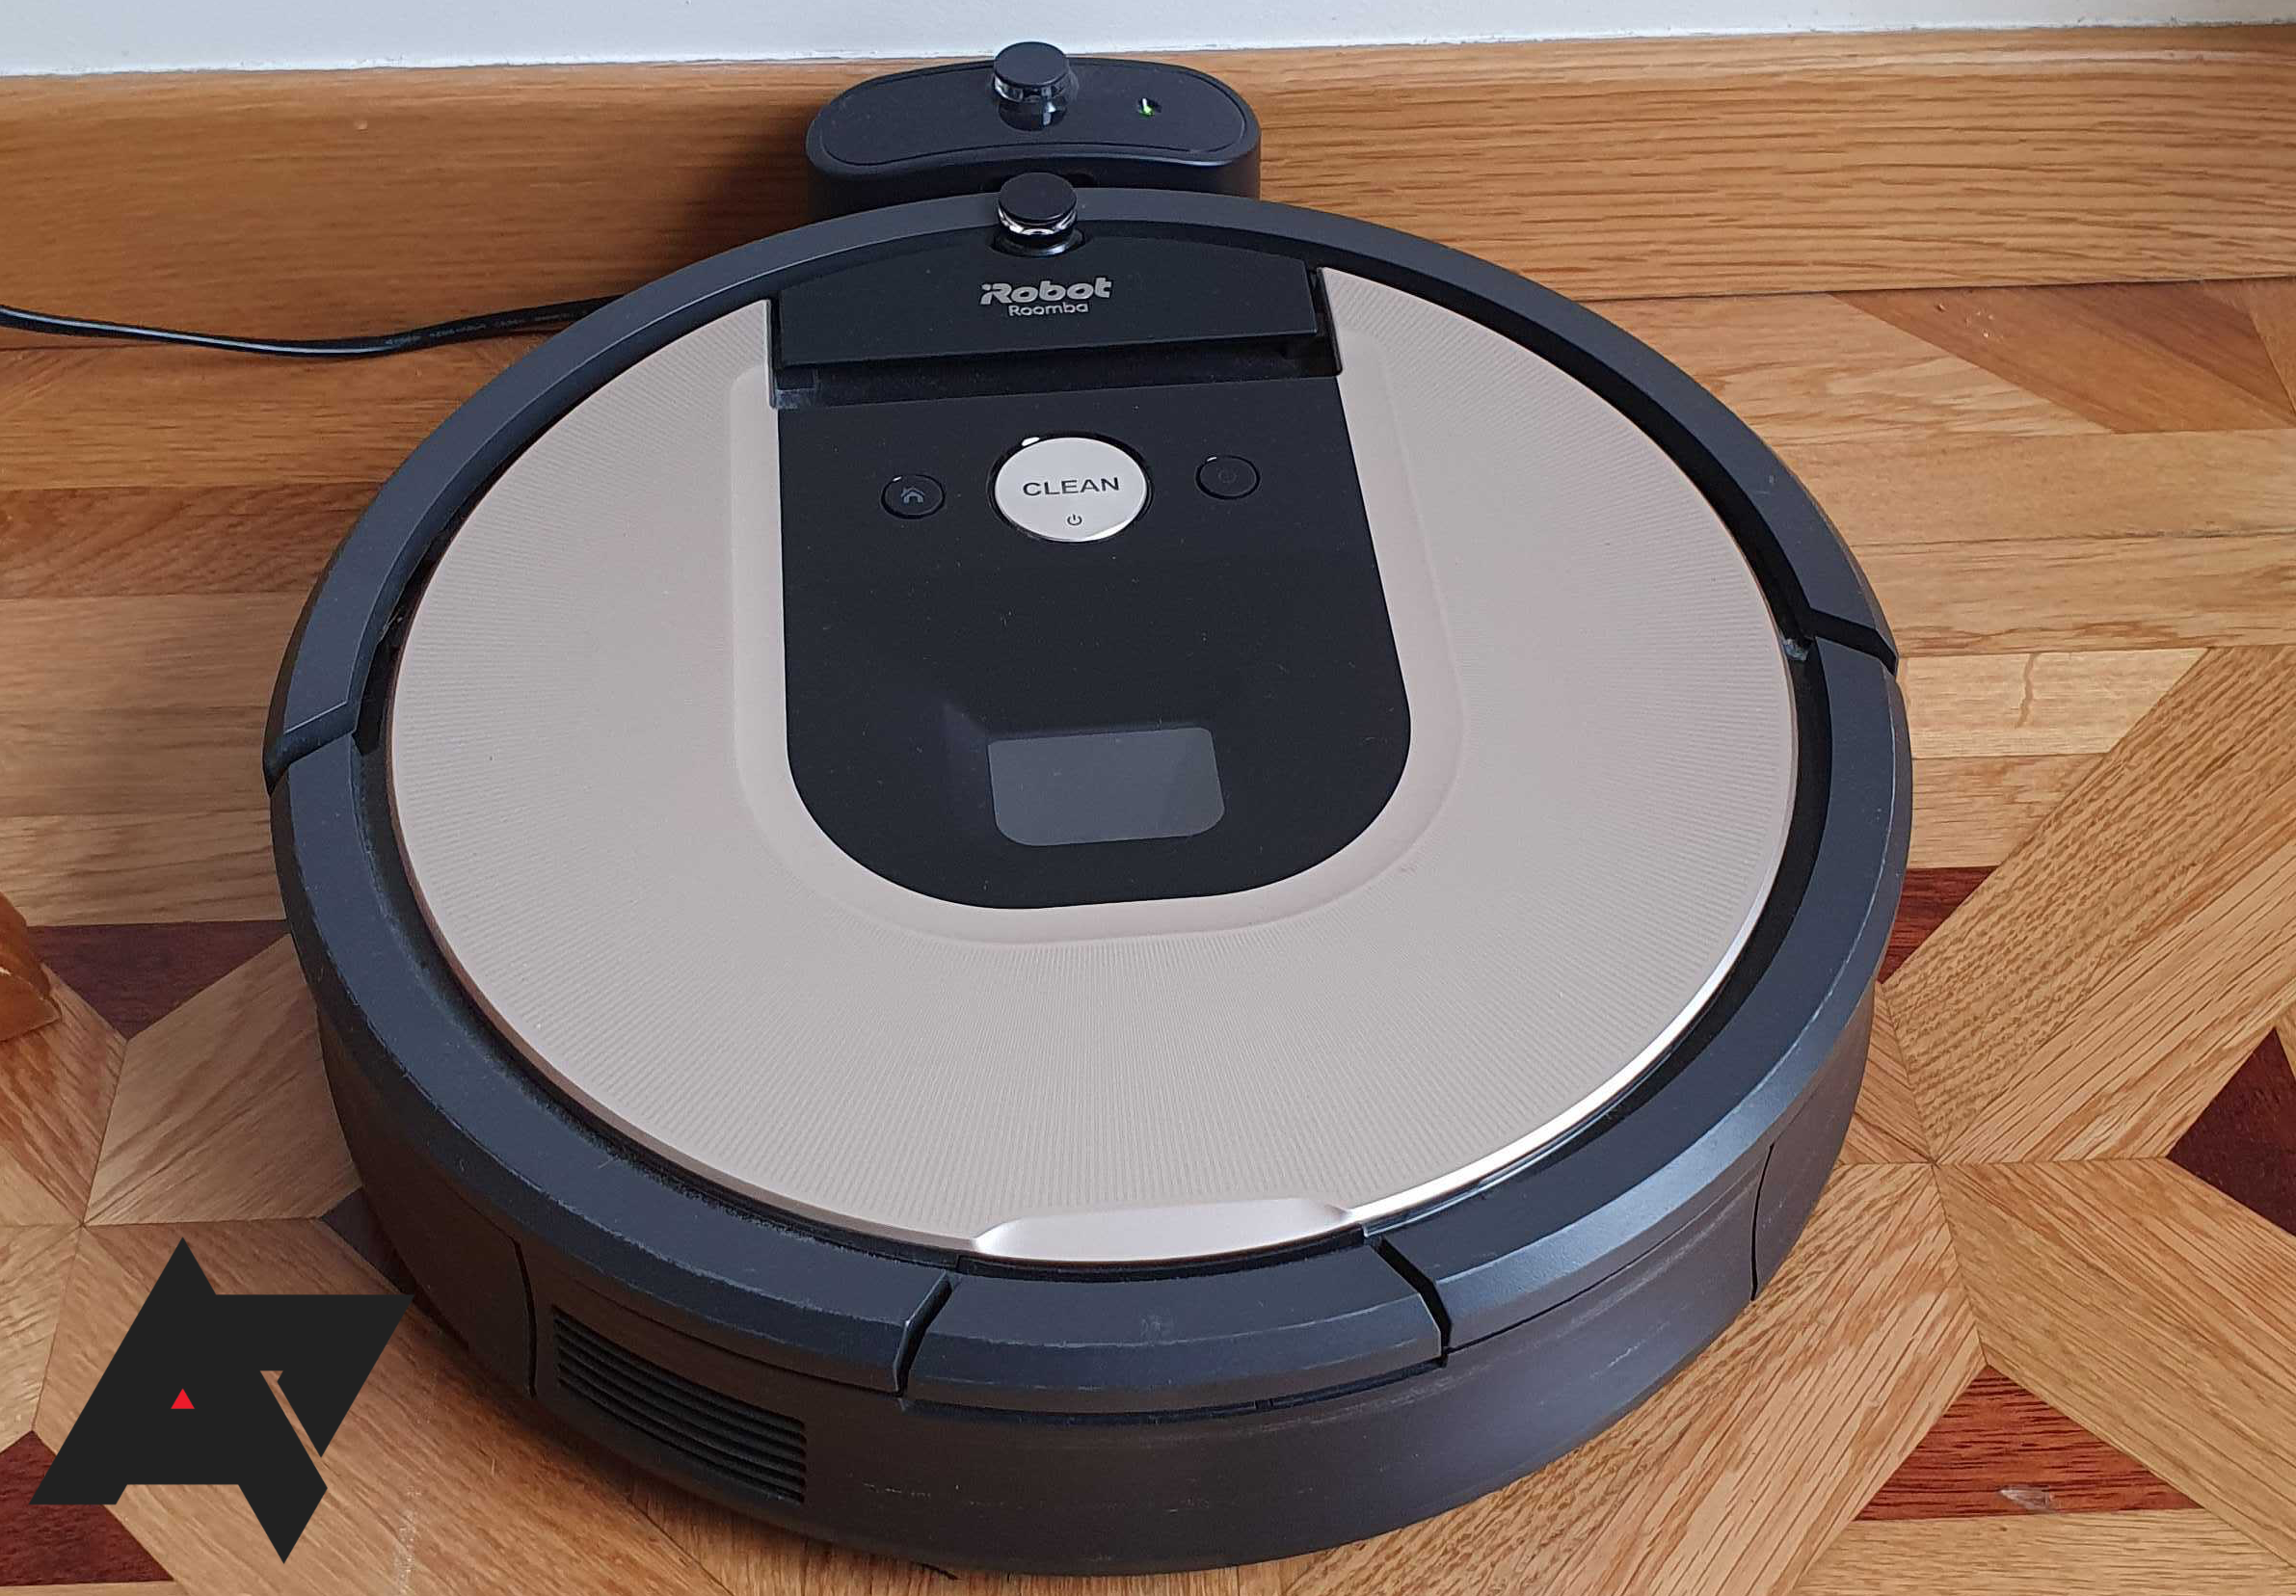 Suck up the savings with $100 off this powerful iRobot Roomba robot vacuum